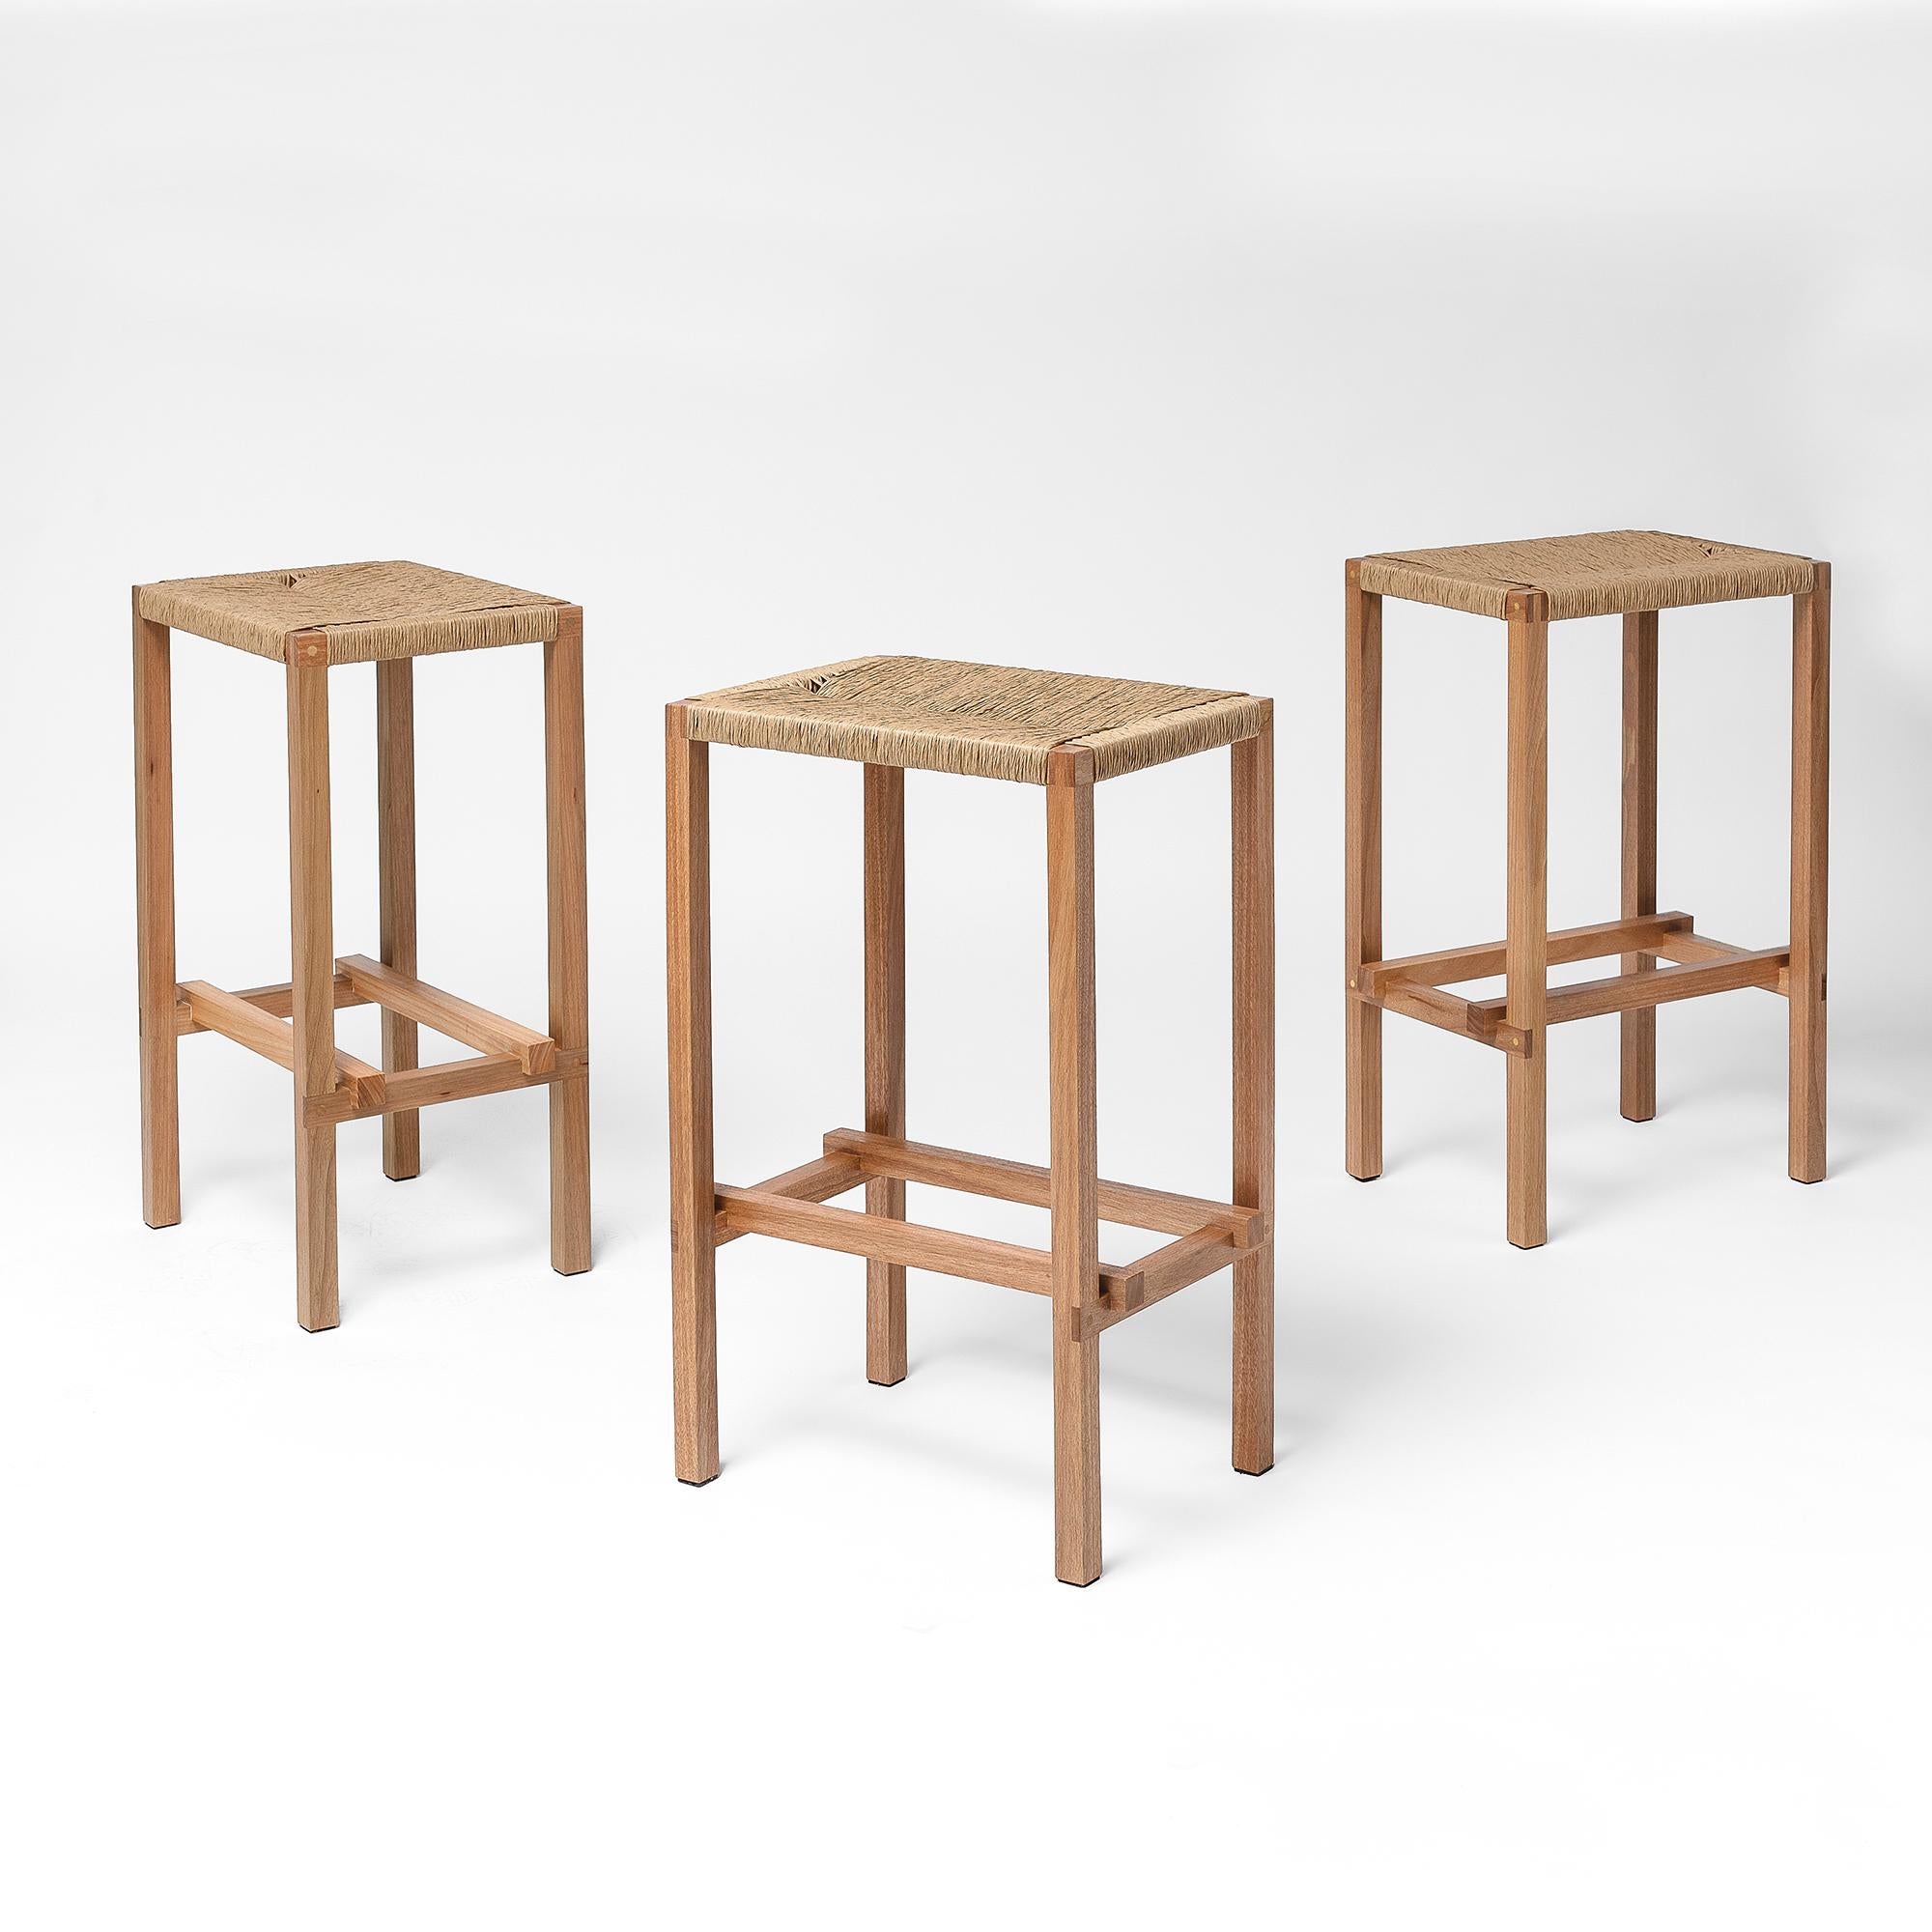 Other M2 Stool, Set of 3 Woven Seat Contemporary Handcrafted Solid Wood Furniture For Sale